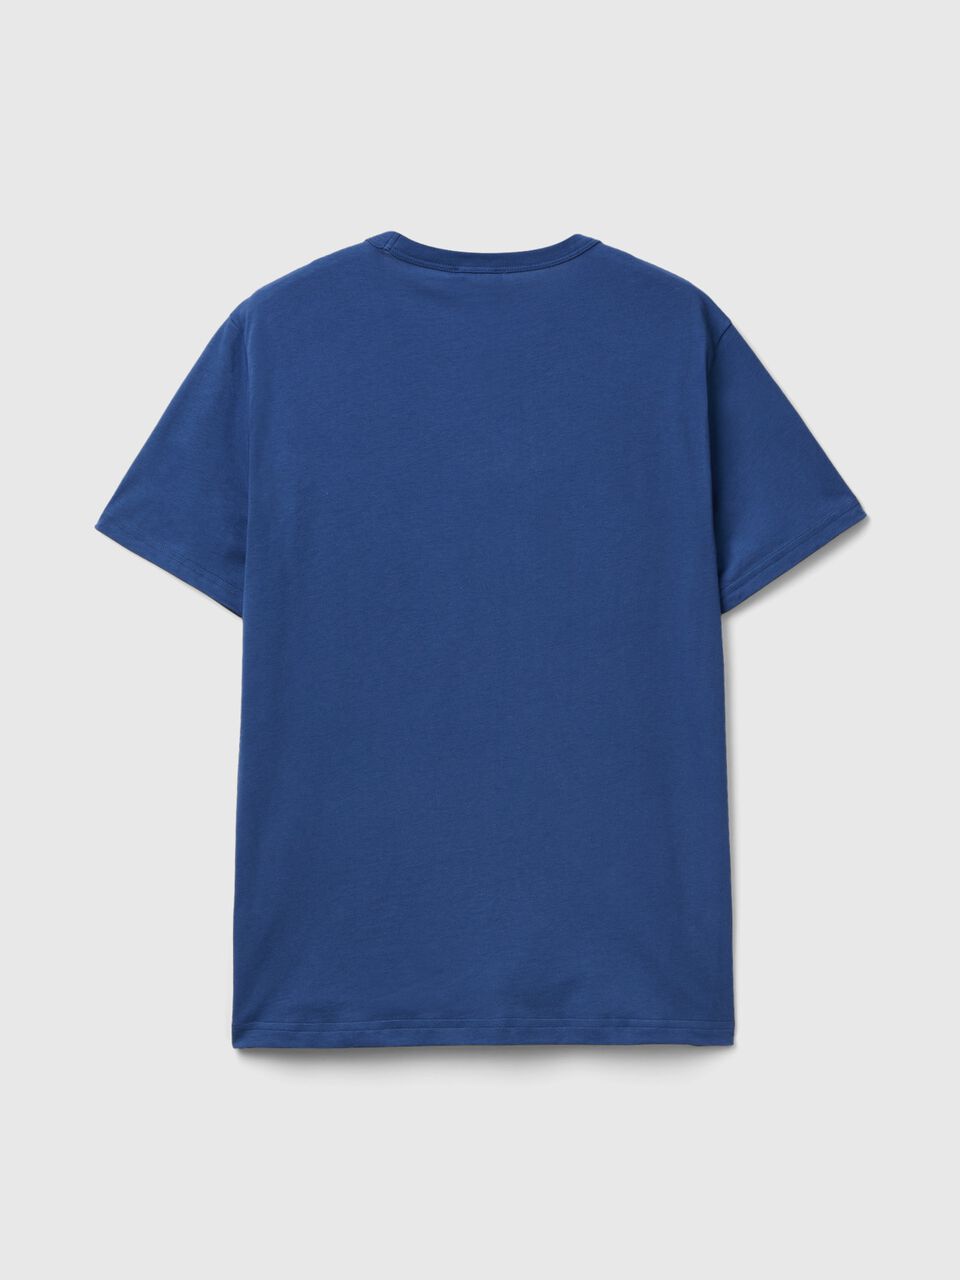 Air force blue t-shirt | logo in Blue Benetton Air Force with - print cotton organic